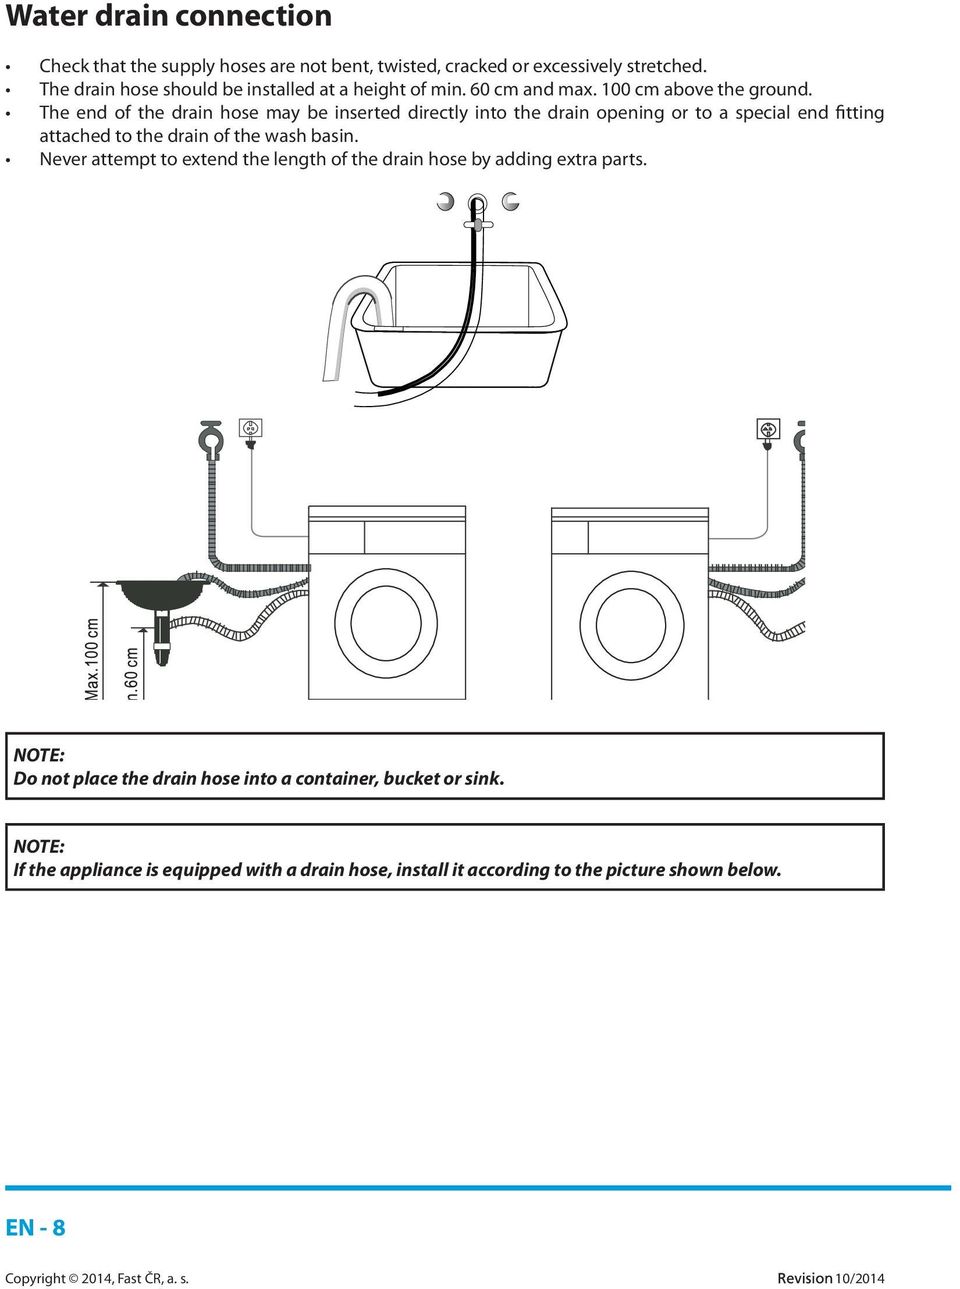 The end of the drain hose may be inserted directly into the drain opening or to a special end fitting attached to the drain of the wash basin.